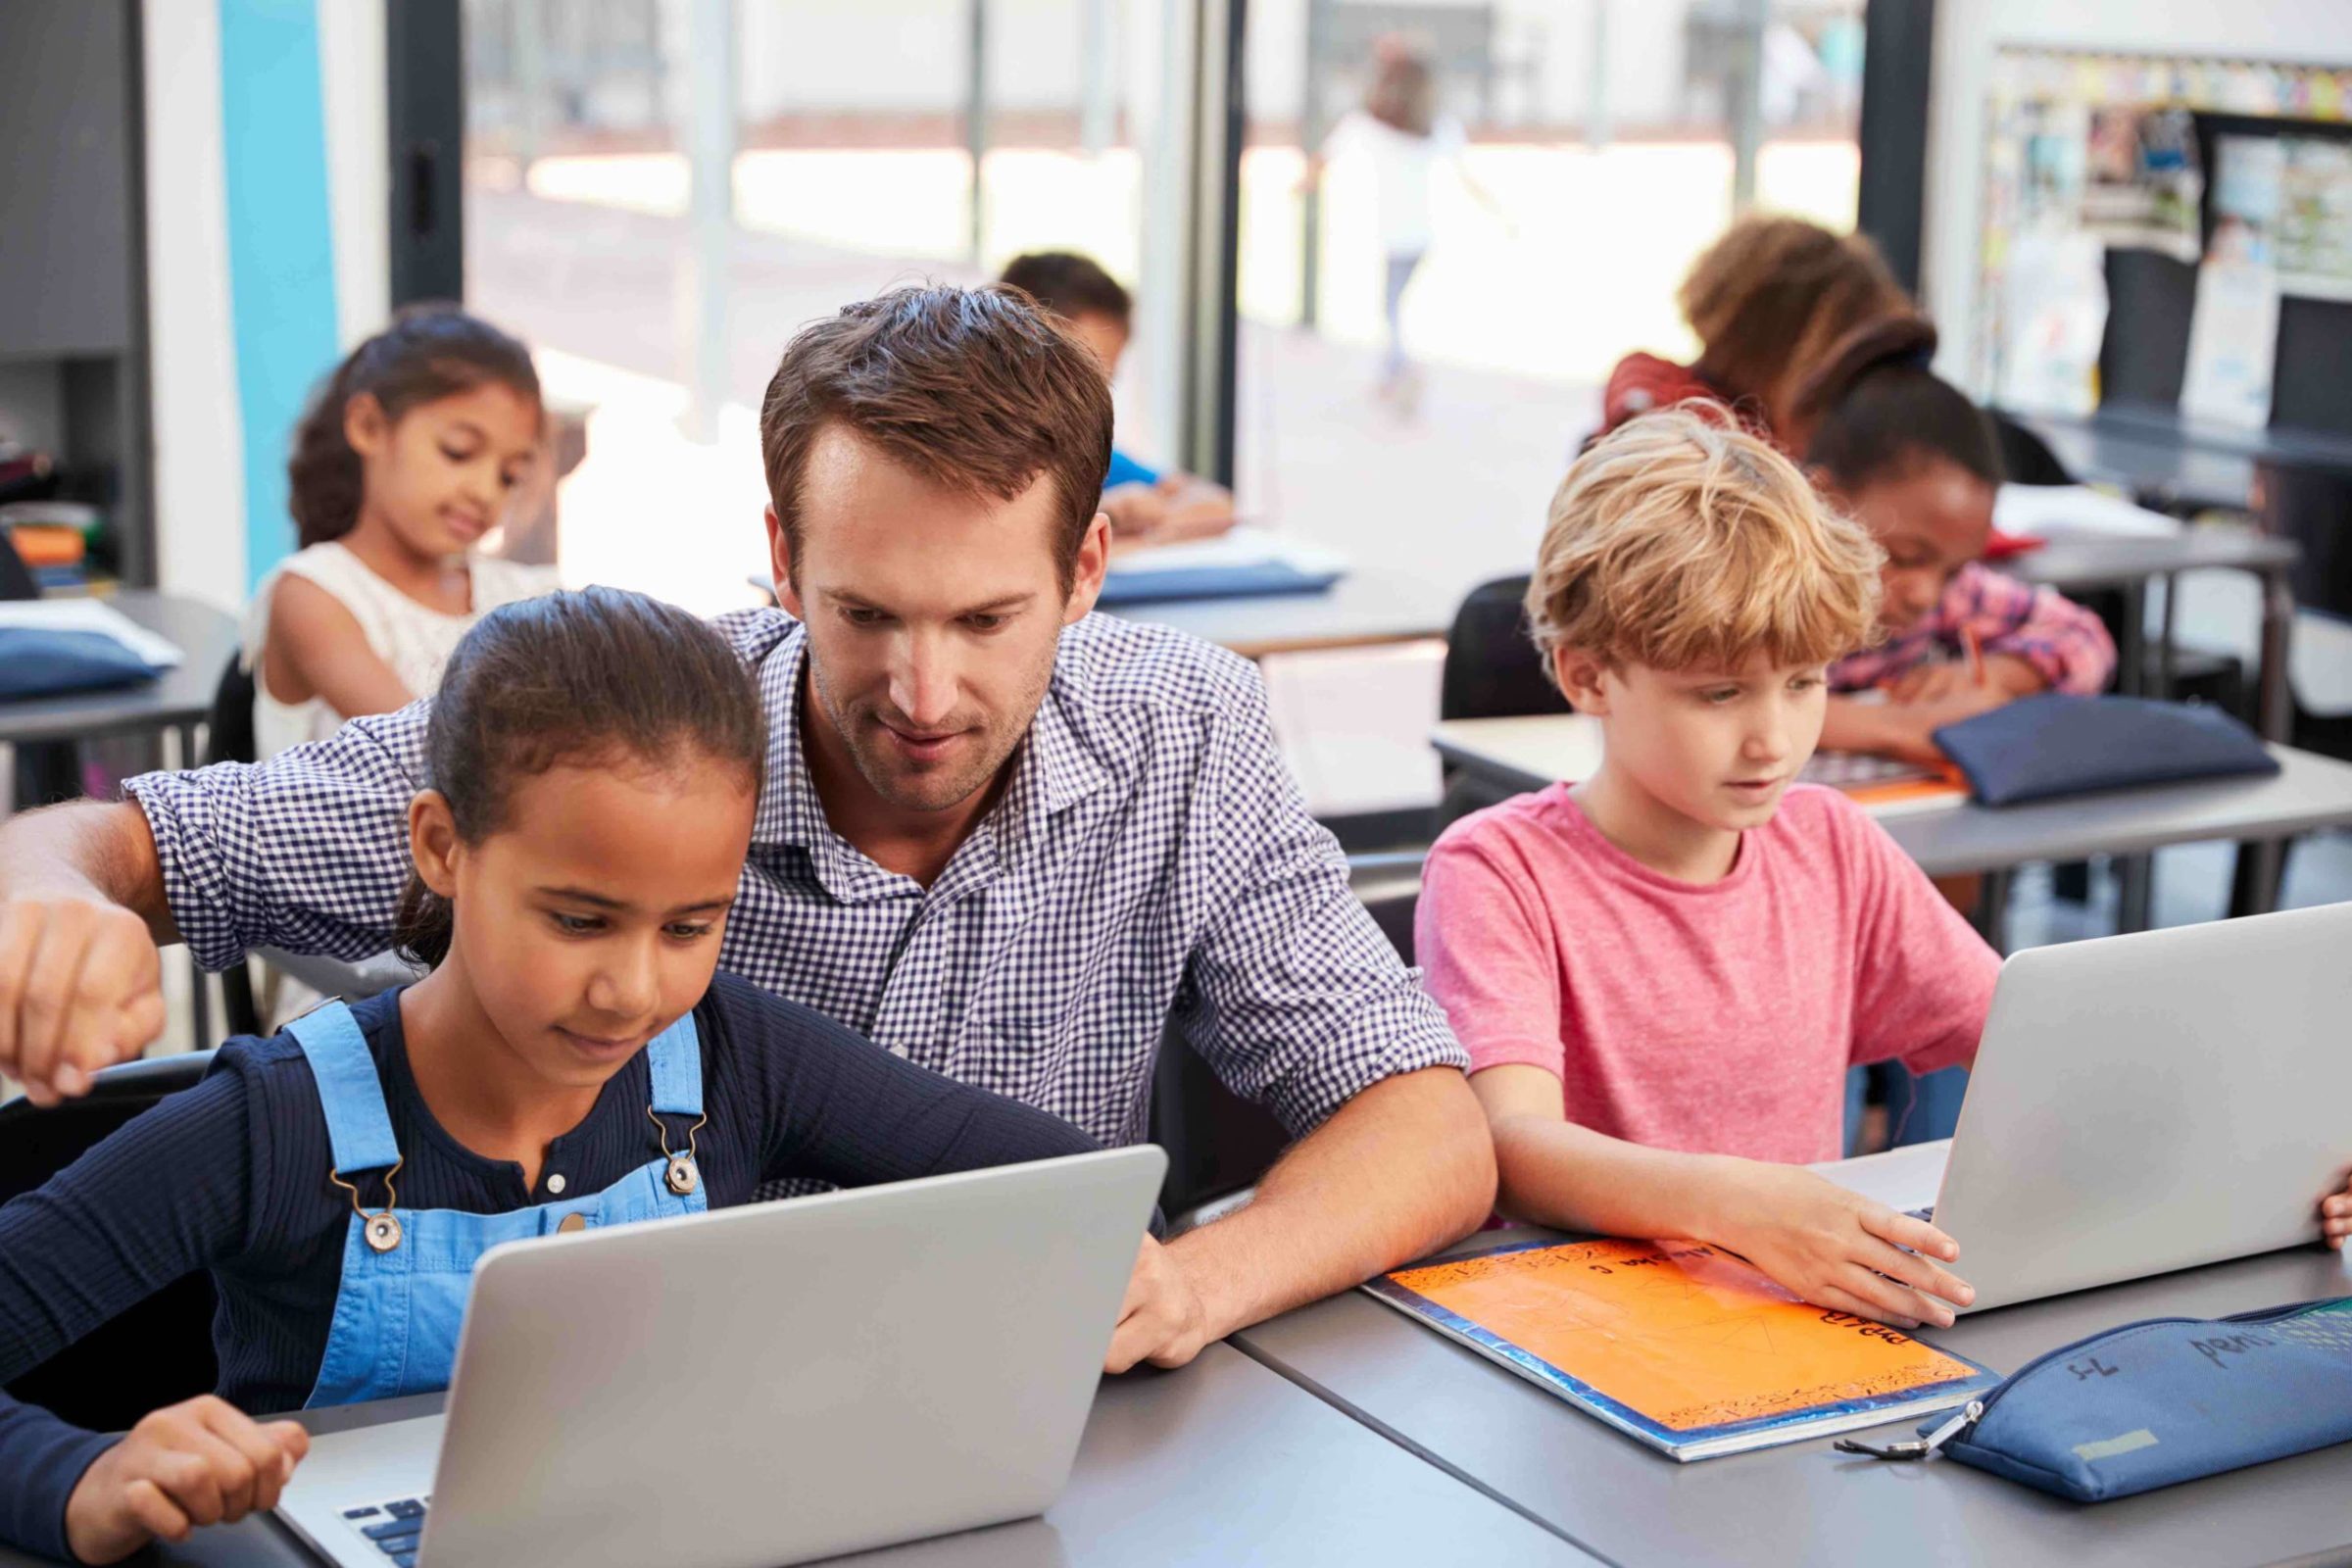 Benefits of Technology in the Classroom